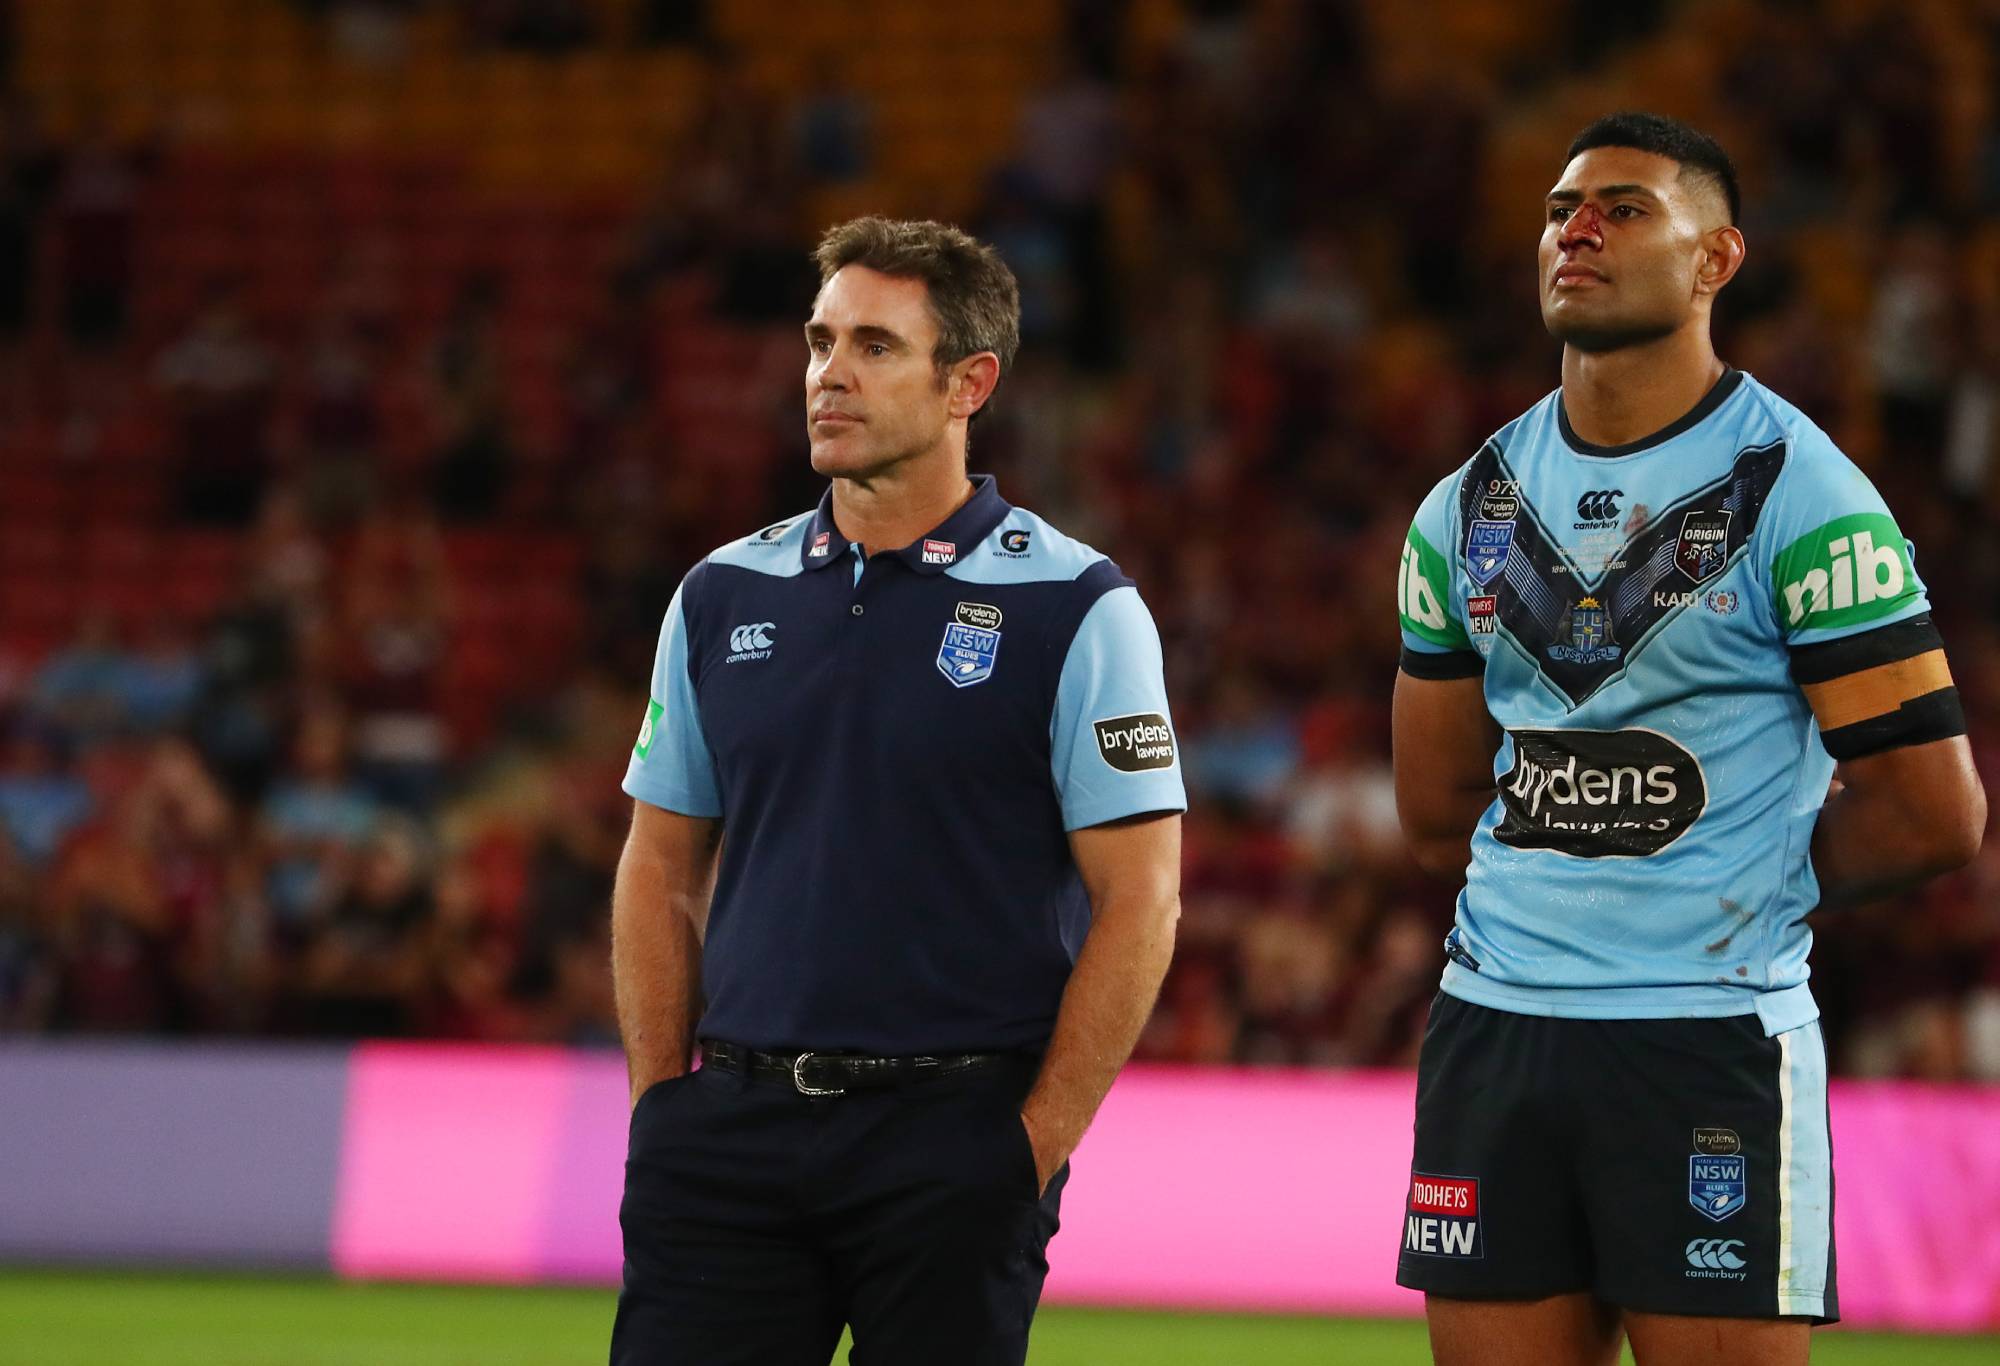 BRISBANE, AUSTRALIA - NOVEMBER 18: Blues coach Brad Fittler and Daniel Tupou look on after game three of the State of Origin series between the Queensland Maroons and the New South Wales Blues at Suncorp Stadium on November 18, 2020 in Brisbane, Australia. (Photo by Chris Hyde/Getty Images)